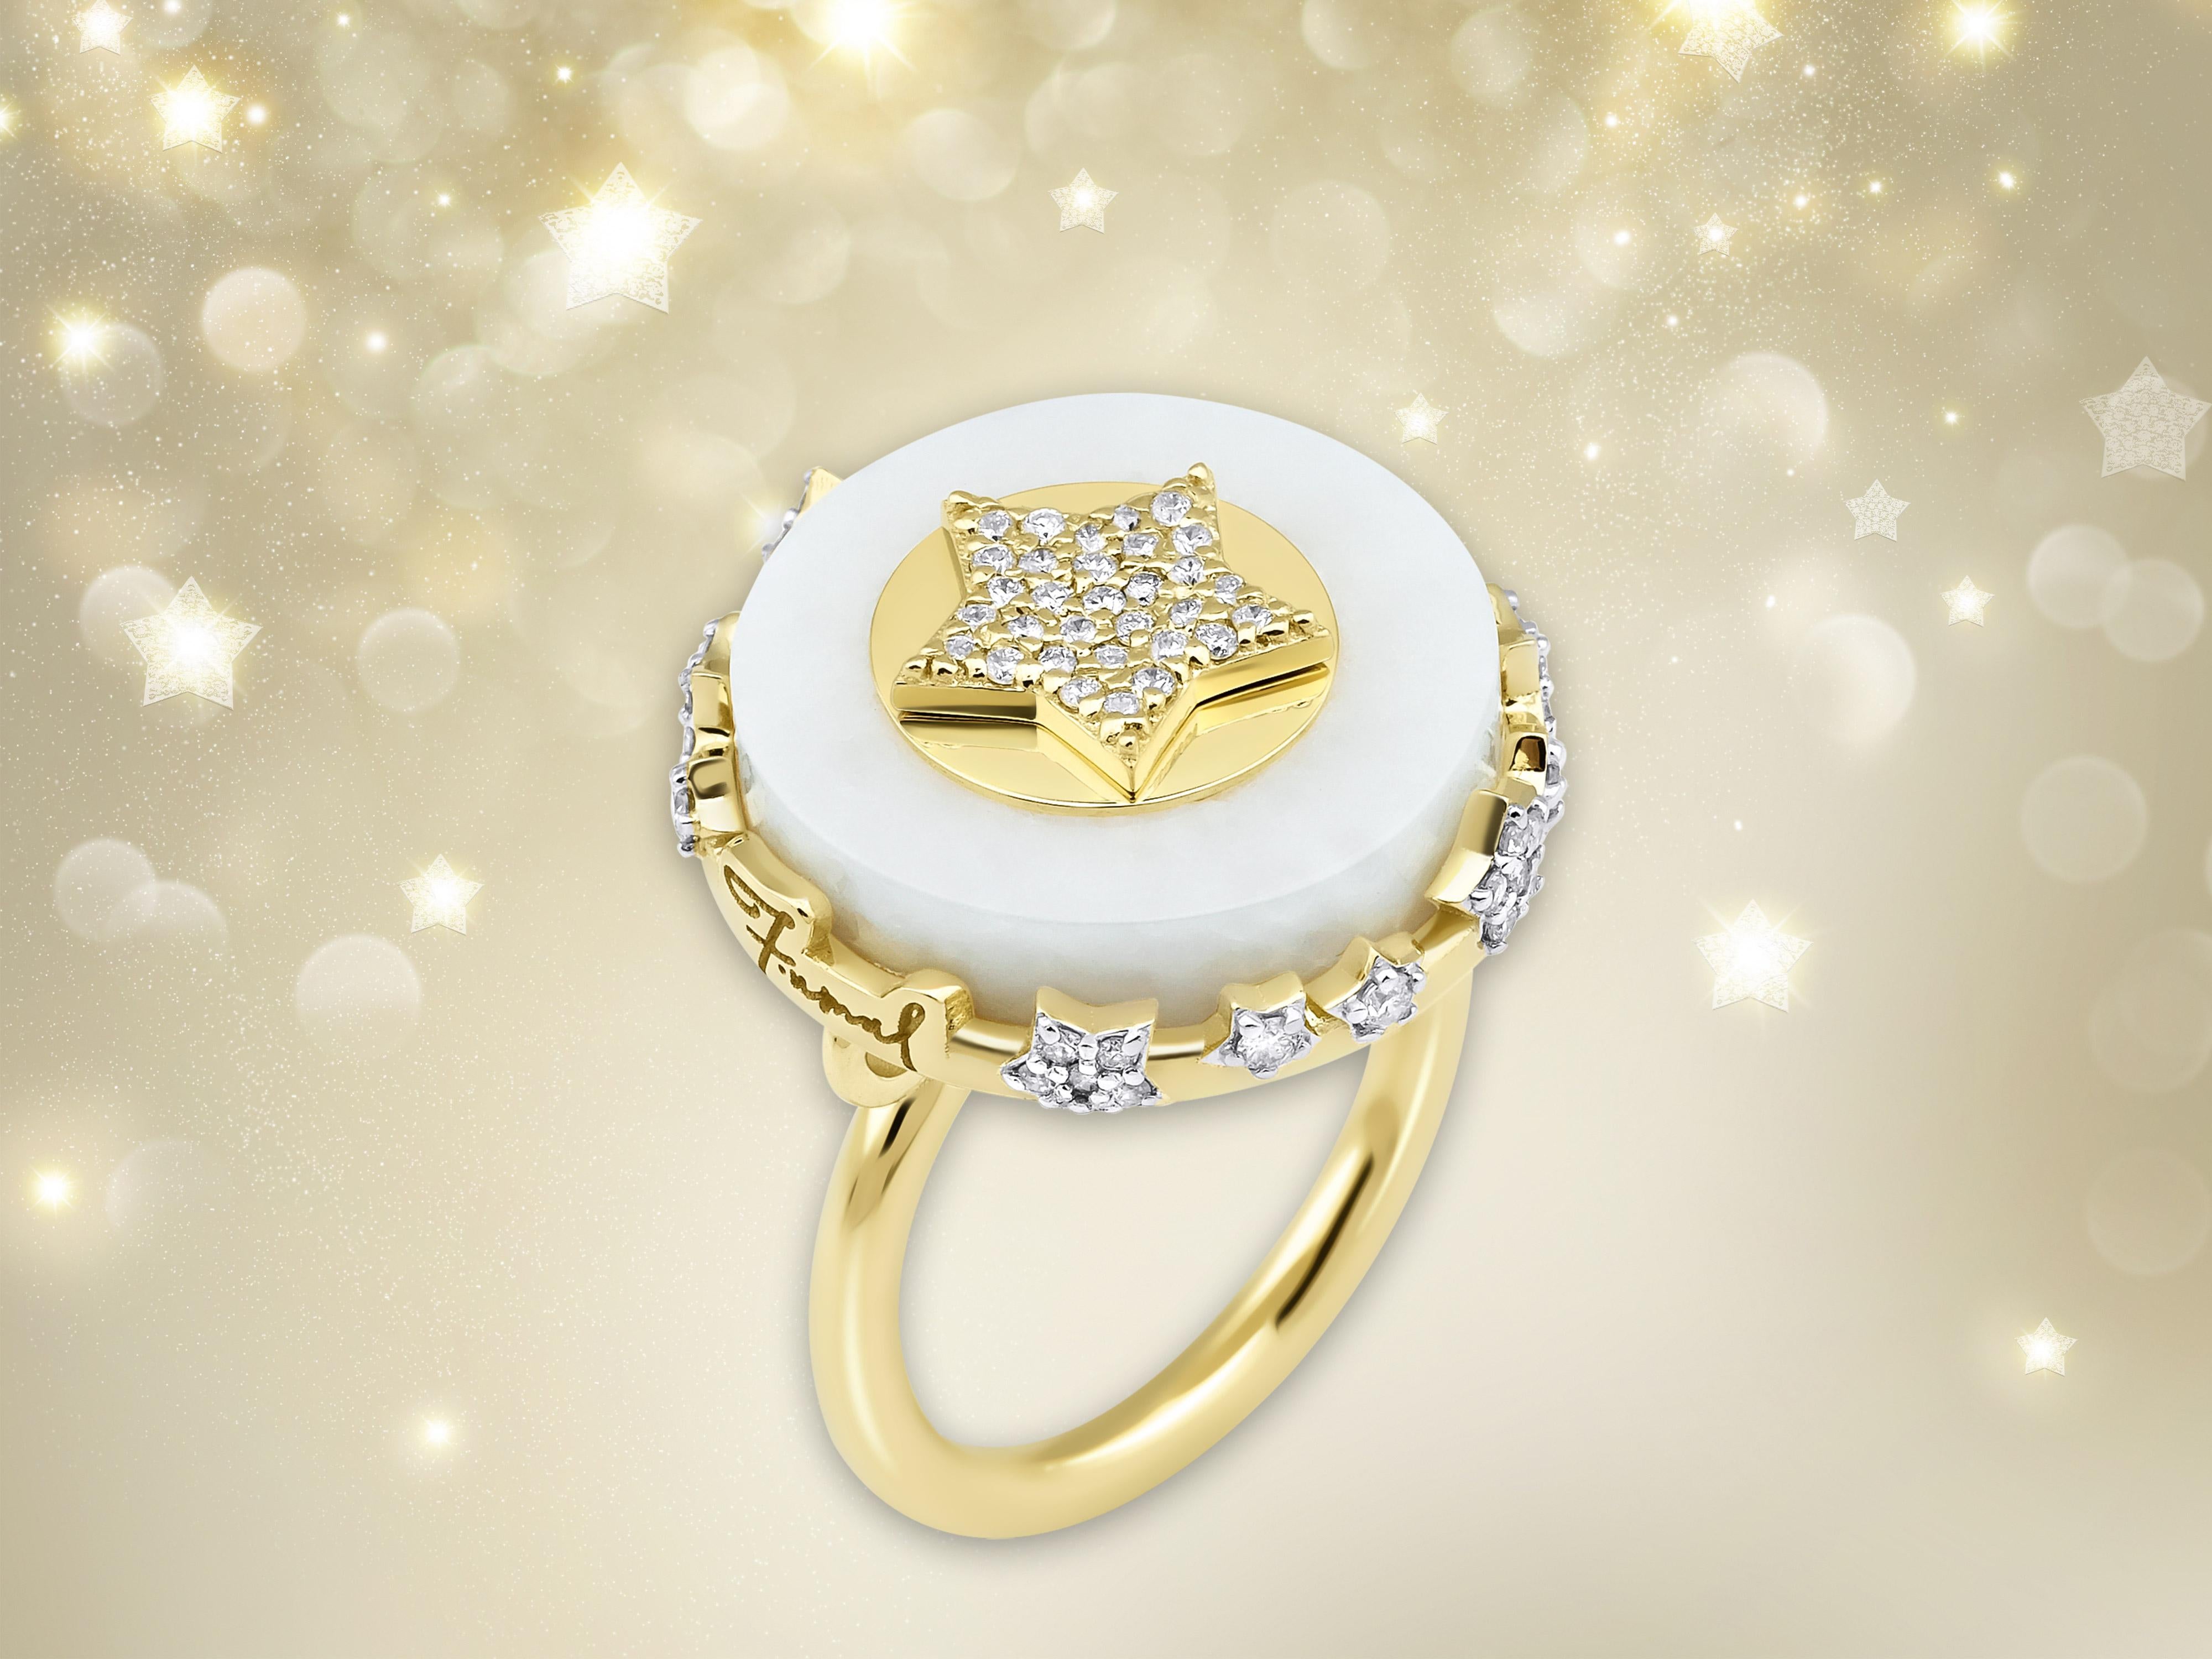 For Sale:  Star Charm White Marble Ring with 14k Yellow Gold and .69ct Natural Diamonds 5